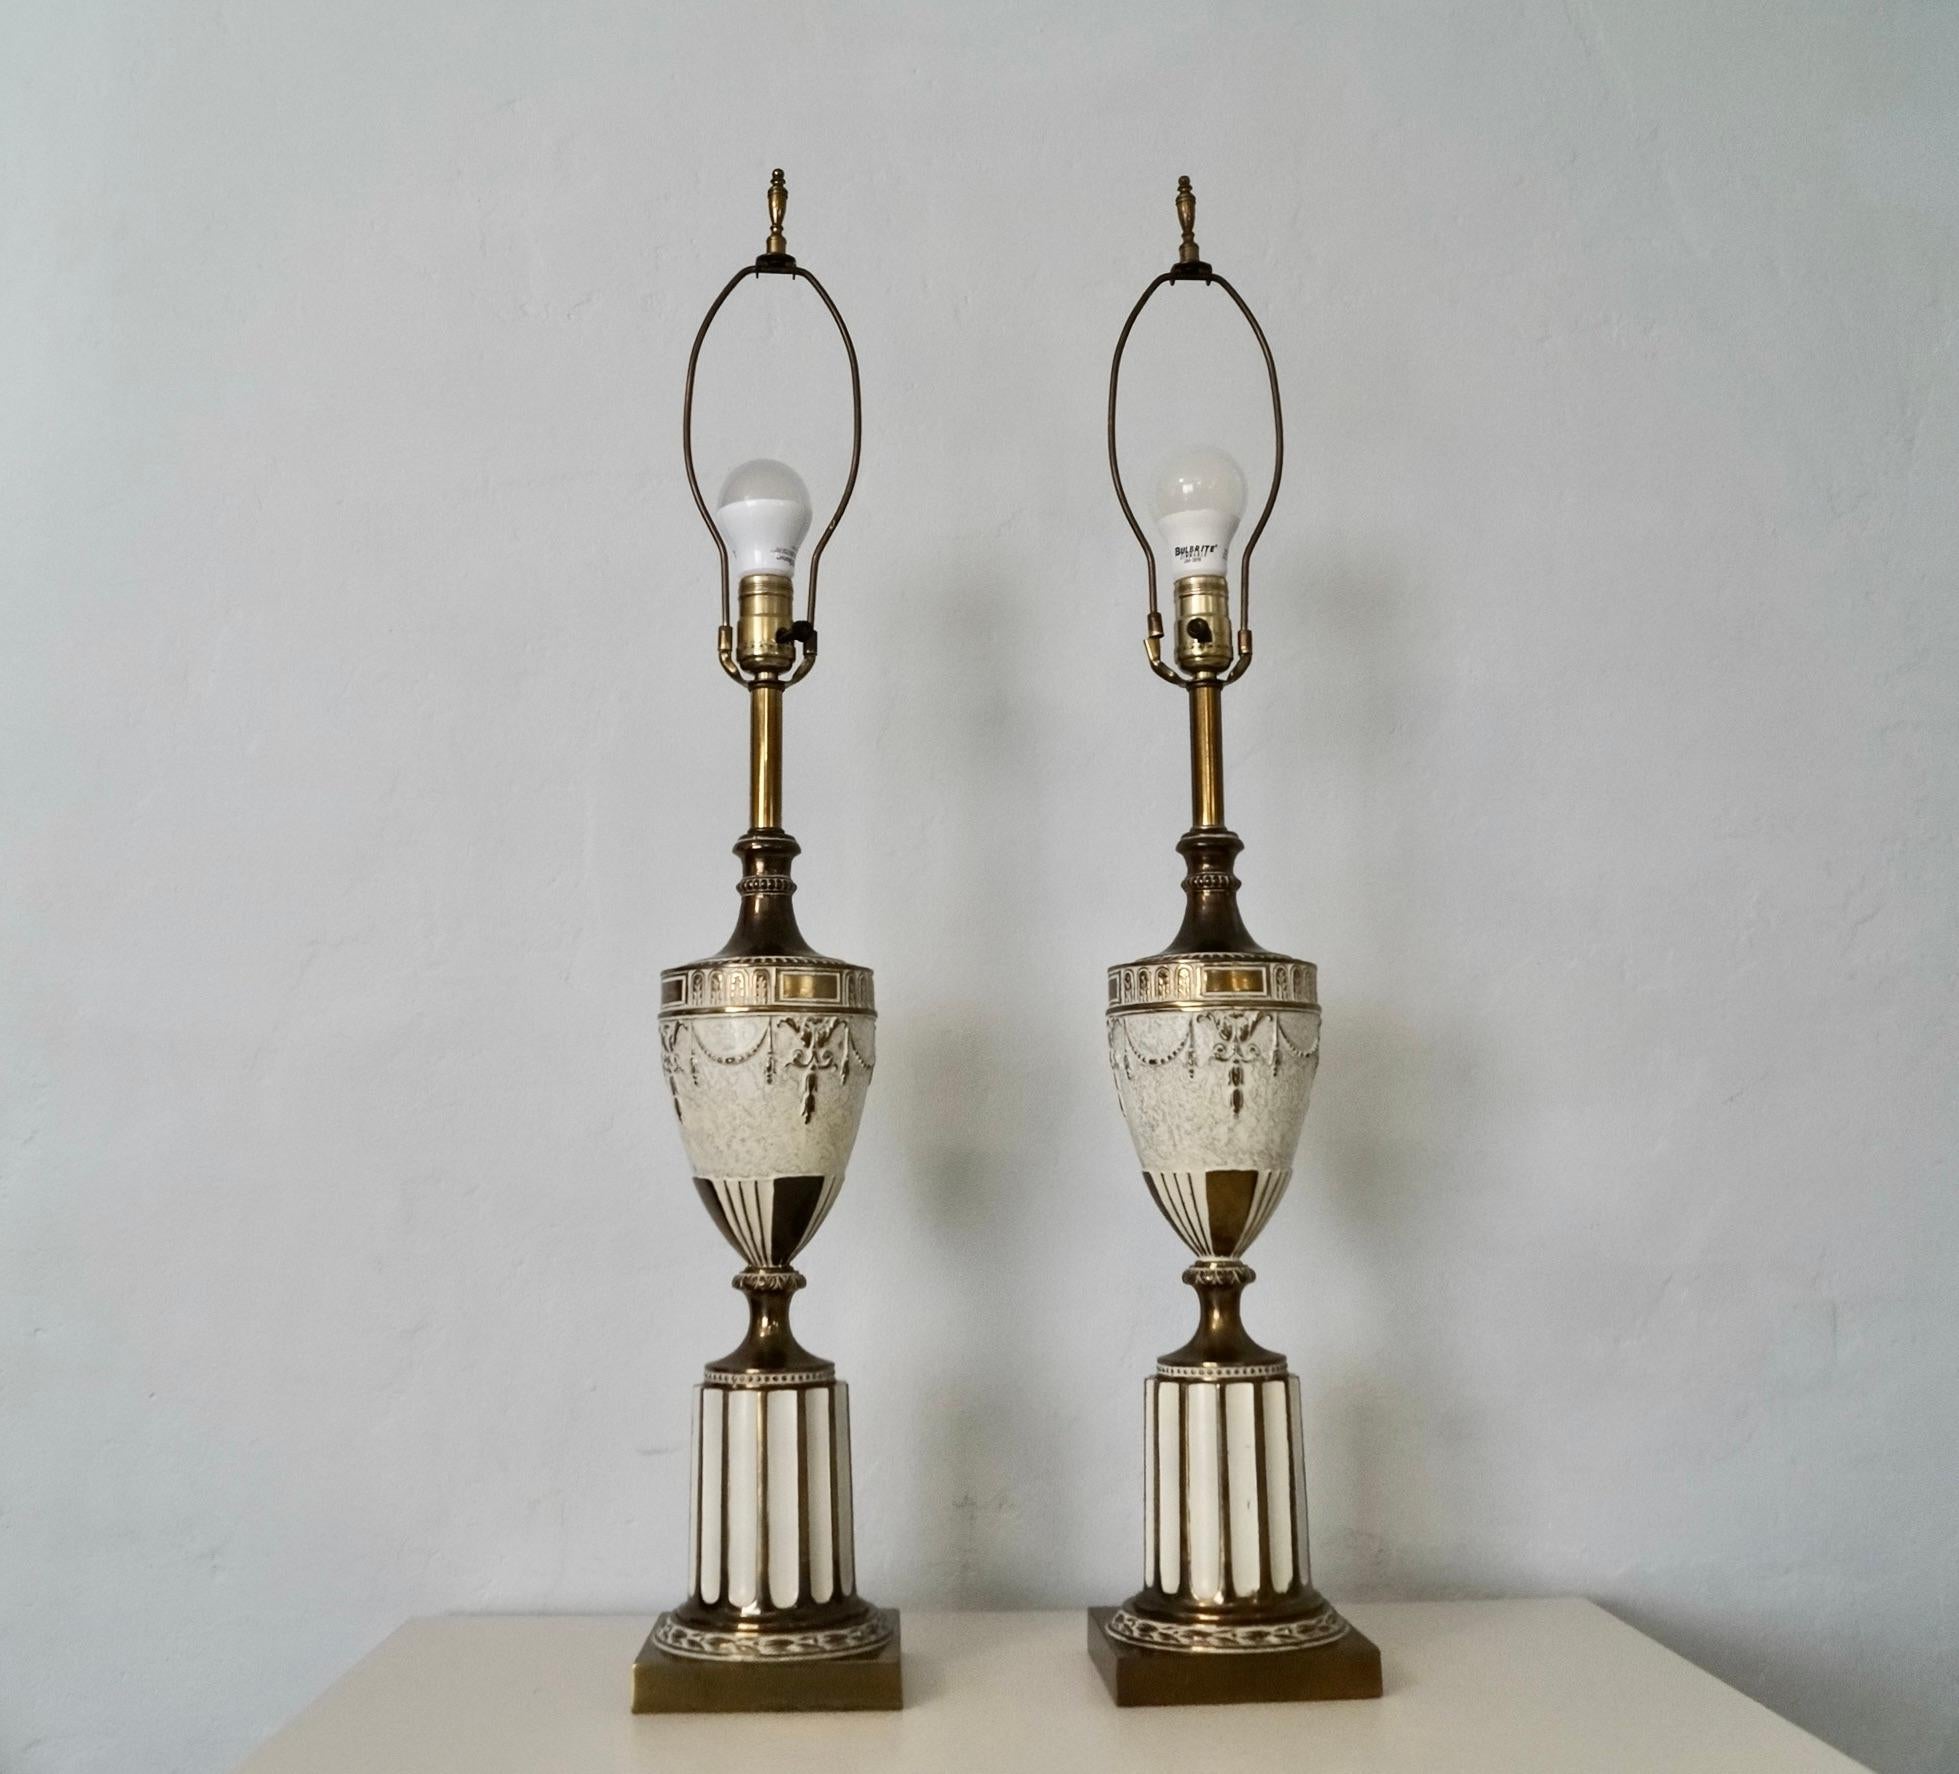 Pair of vintage ancient Roman Neoclassical inspired table lamps for sale. Made of solid brass and metal, and are quite beautiful. They are in excellent original condition with some patina to the brass. They are an antique white tone and brass with